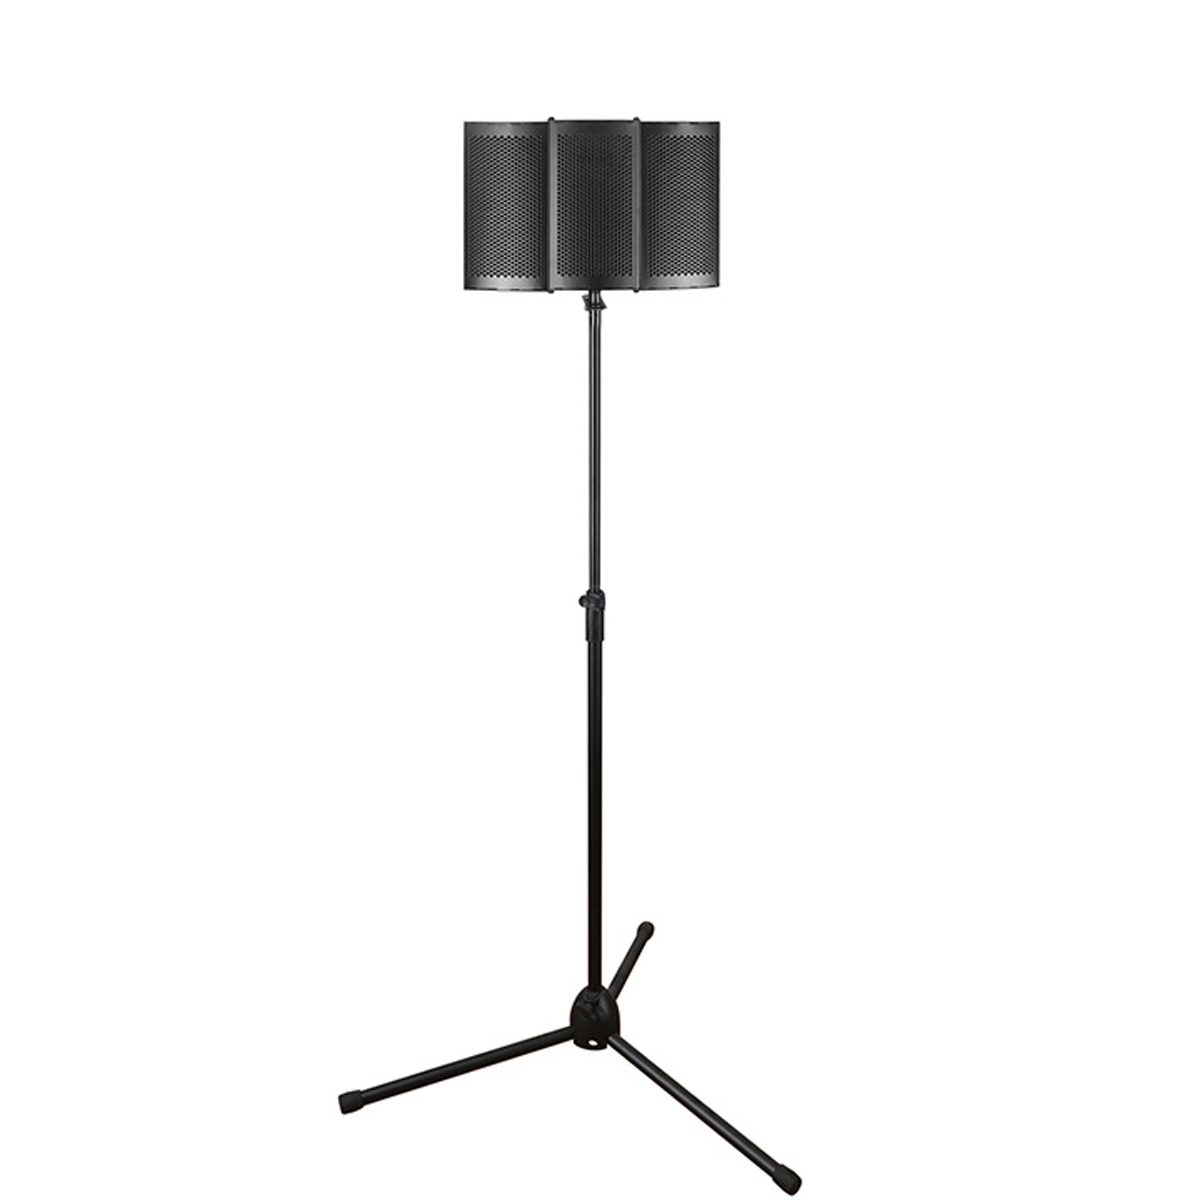 Foldable Microphone Acoustic Isolation Shield Studio Foams Panel for Recording Live Broadcast Microphone